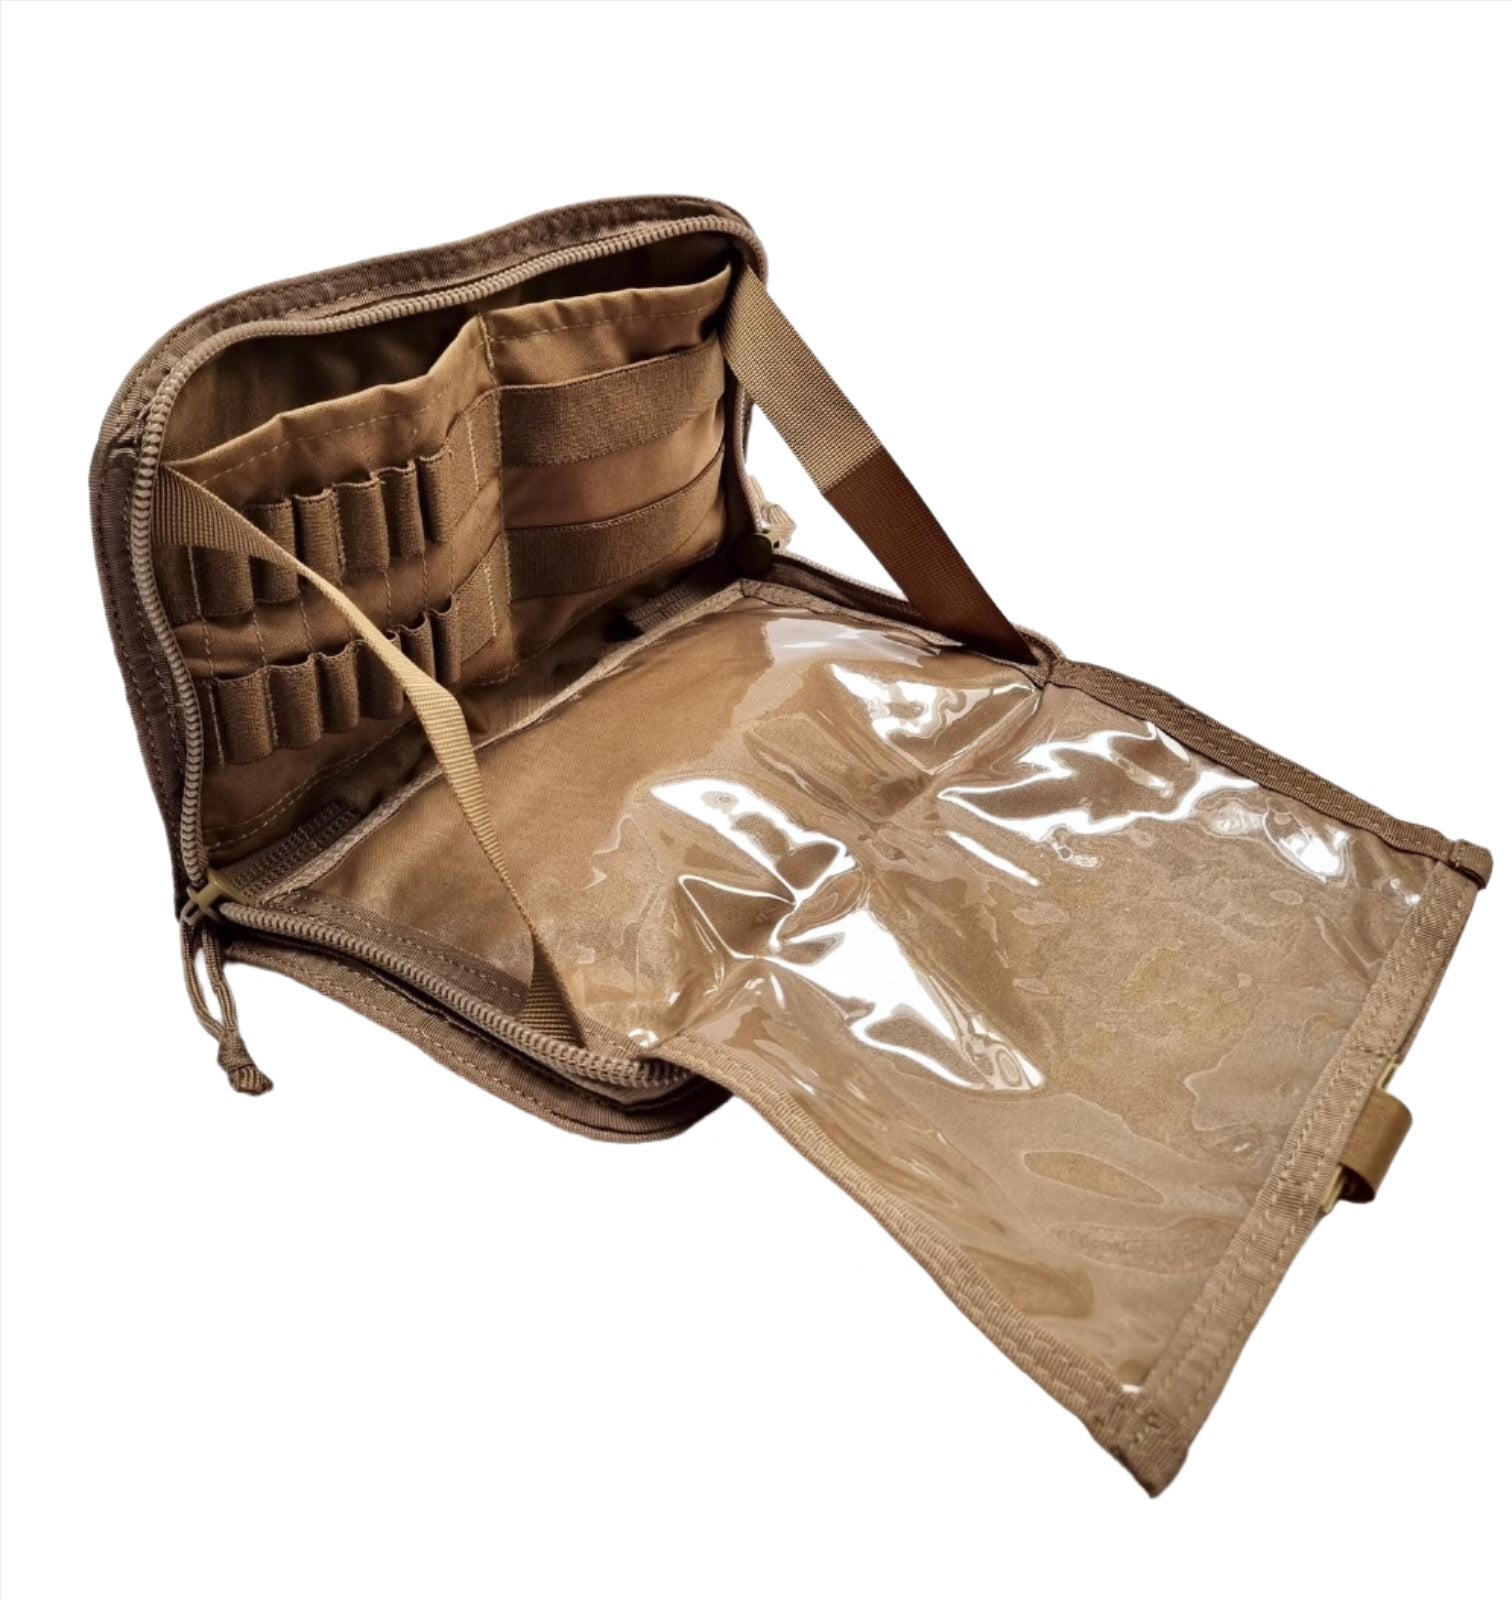 SHE-1044 COMMANDER PANEL / MAP POUCH MAP DISPLAY COLOUR TAN